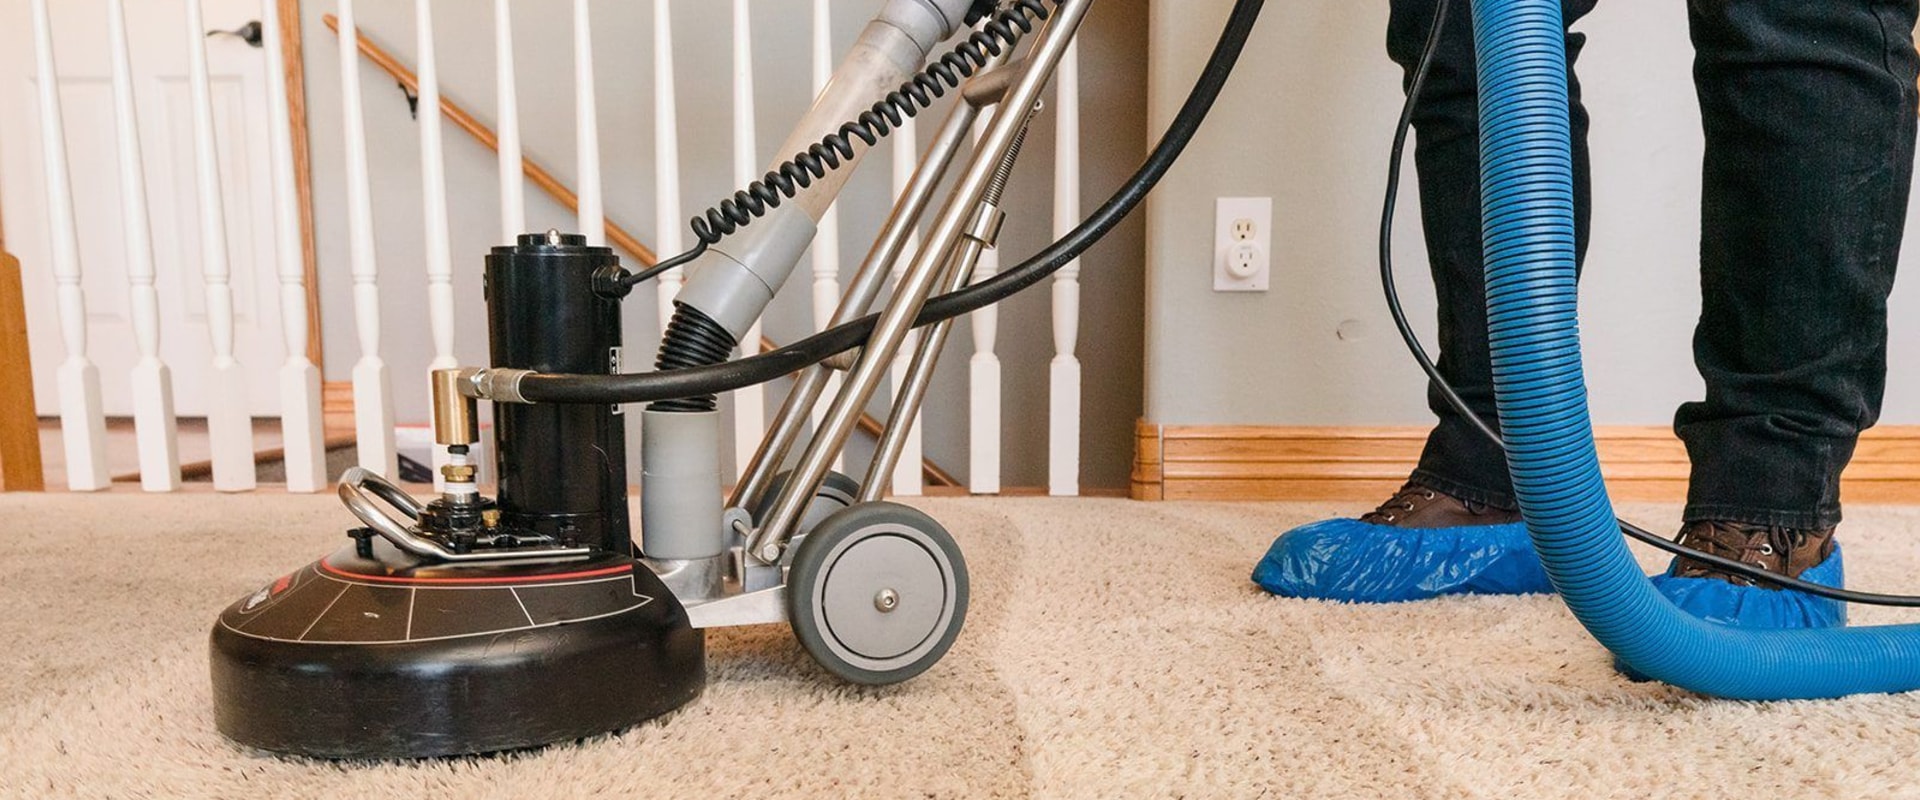 Does professional carpet cleaning get rid of cat urine?